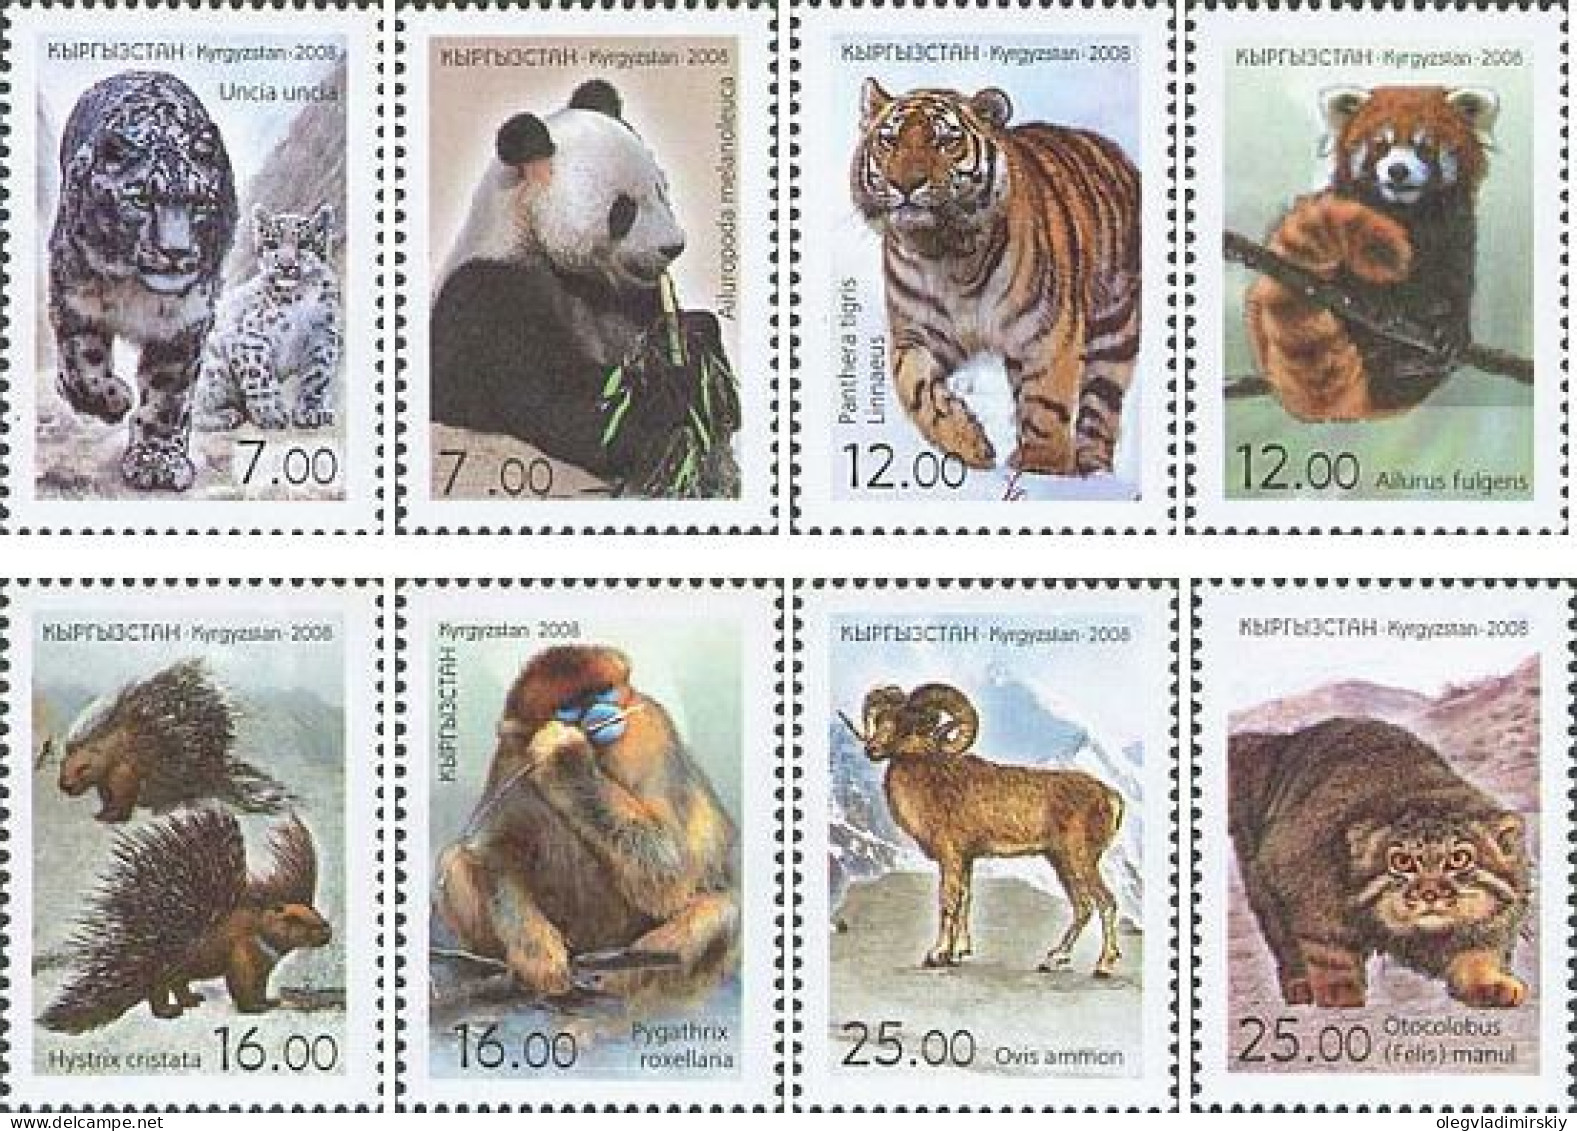 Kyrgyzstan 2008 Animals Of Asia From The Red Book Set Of 8 Perforated Stamps MNH - Kyrgyzstan